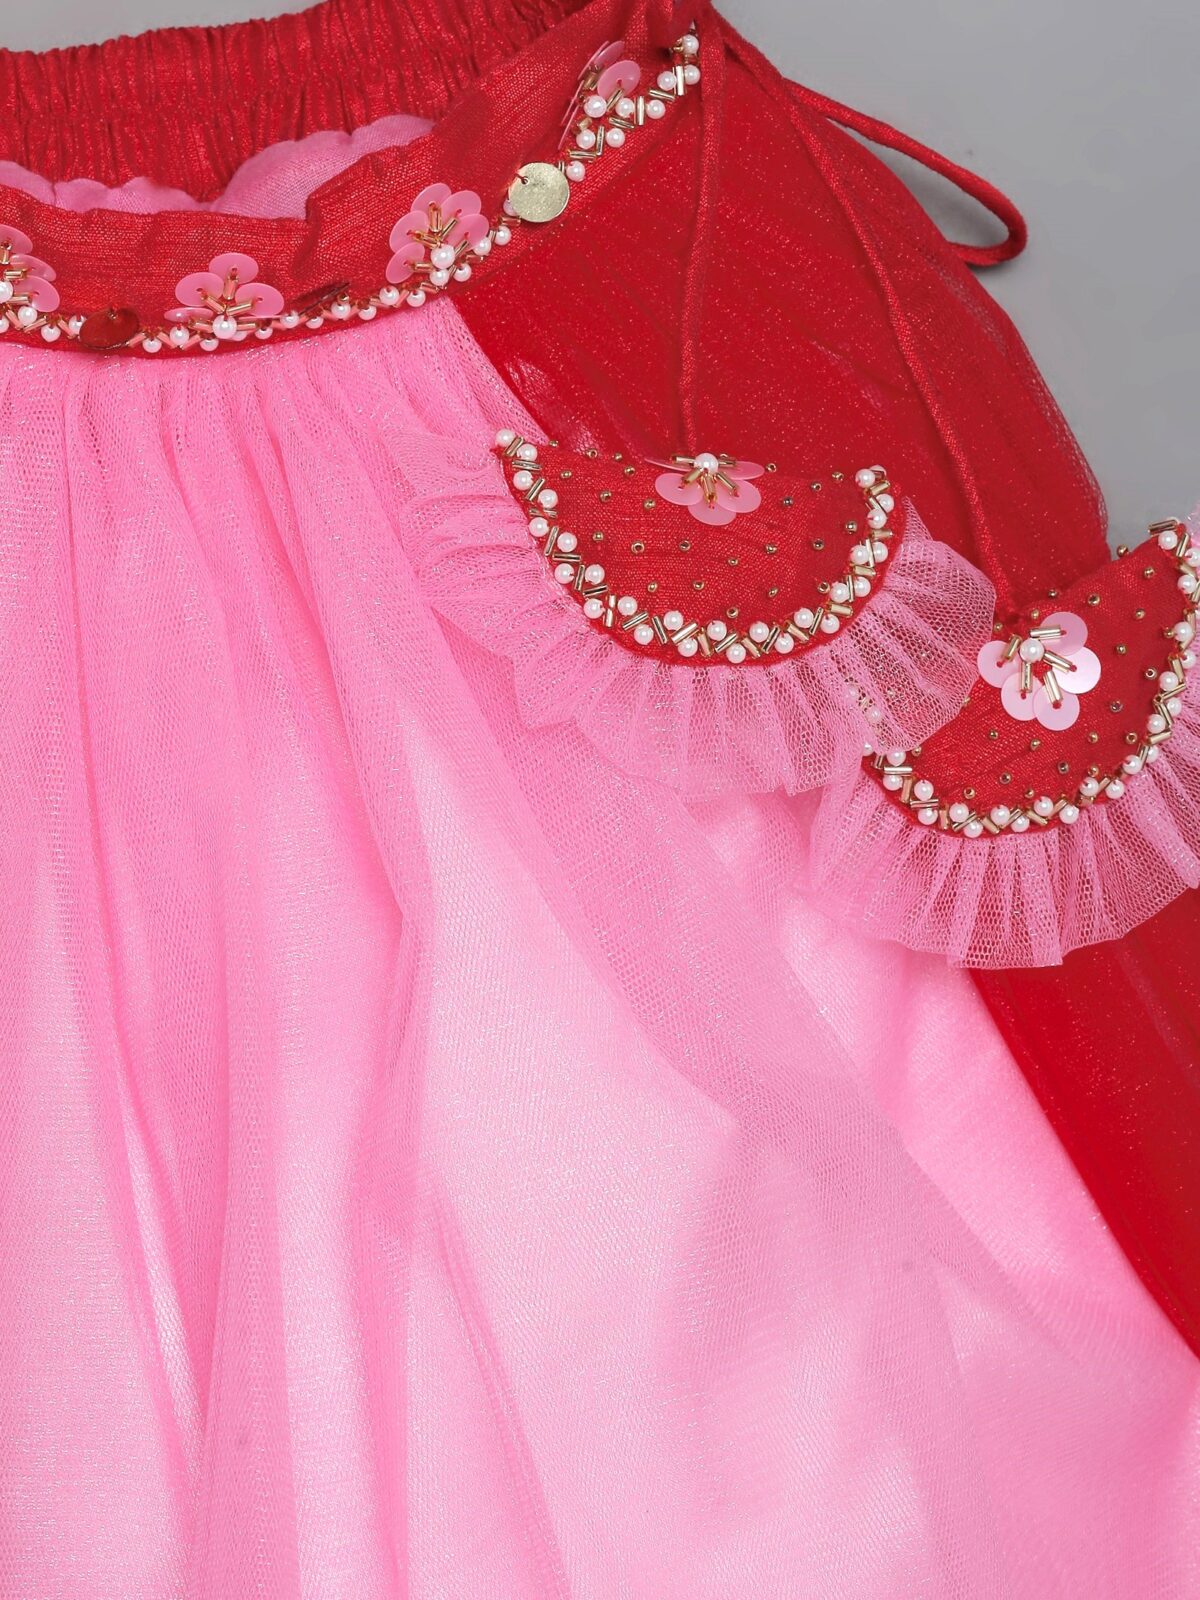 8 11 Red and Pink High Neck Embroided Lehenga